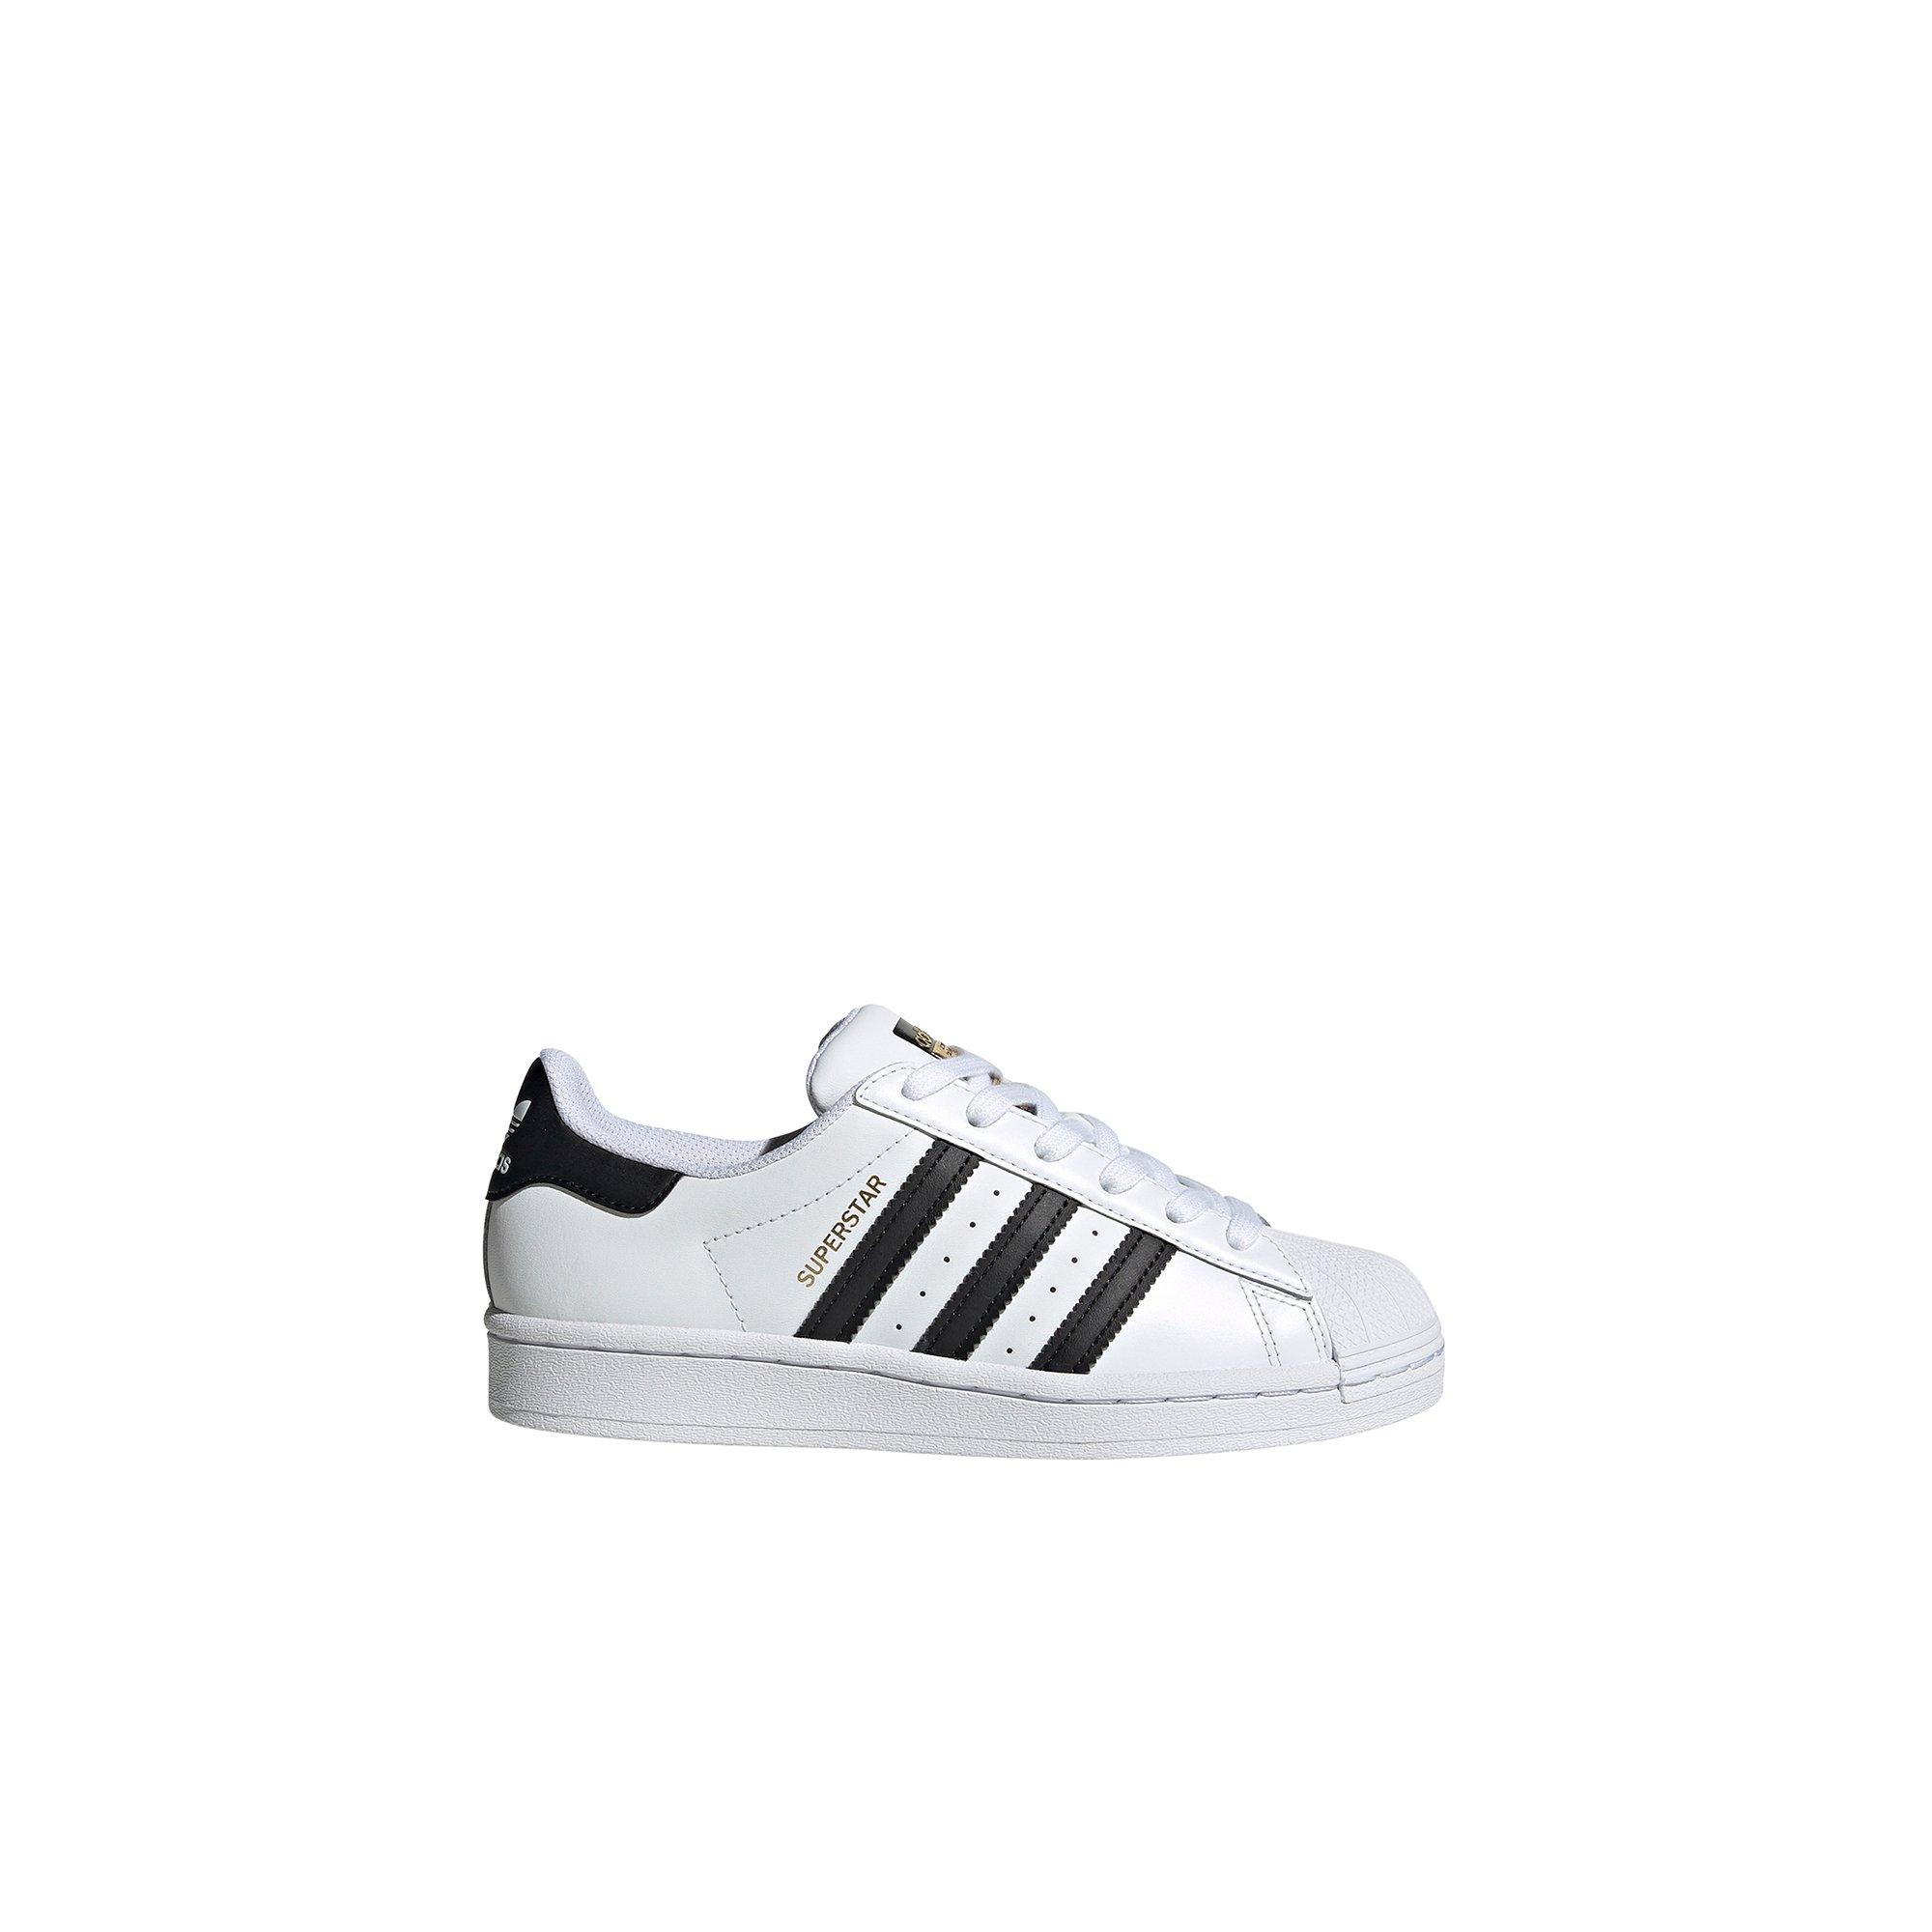 adidas superstar baby shoes